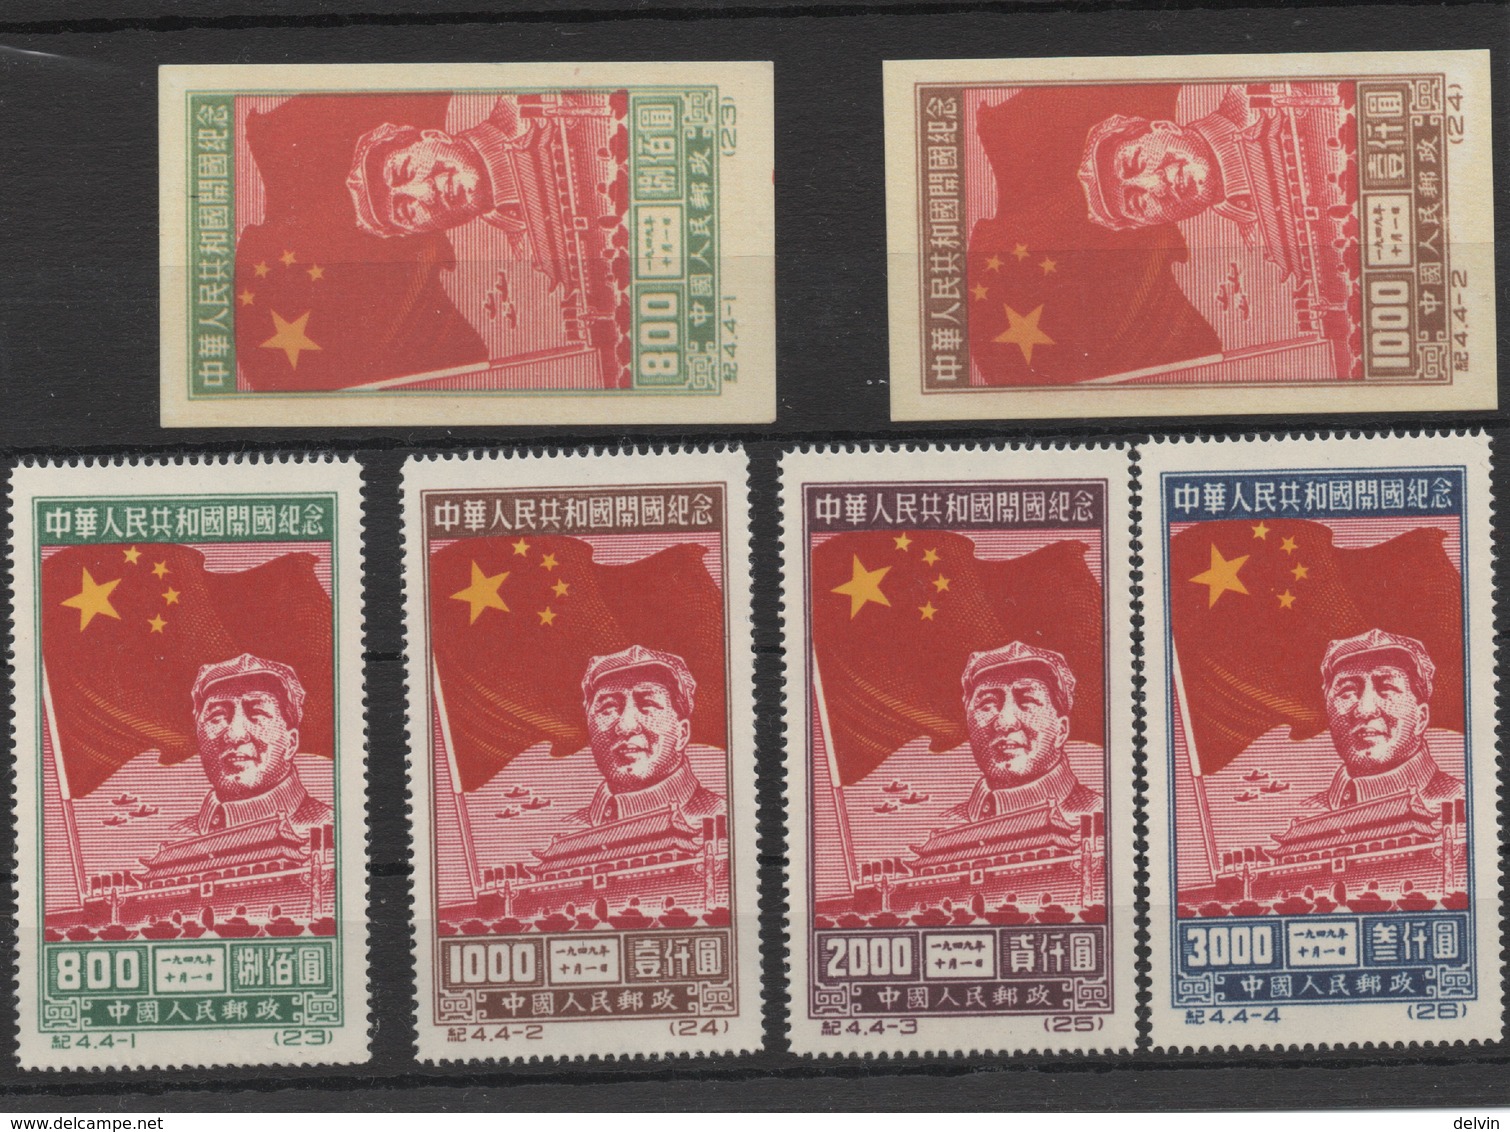 China 1950-Mao Tze Tung And Flag -3 Complete Sets Of 18 Stamps Perf.& Imperf. Reprint Of The Era. New No Gum (see Photo) - Ristampe Ufficiali